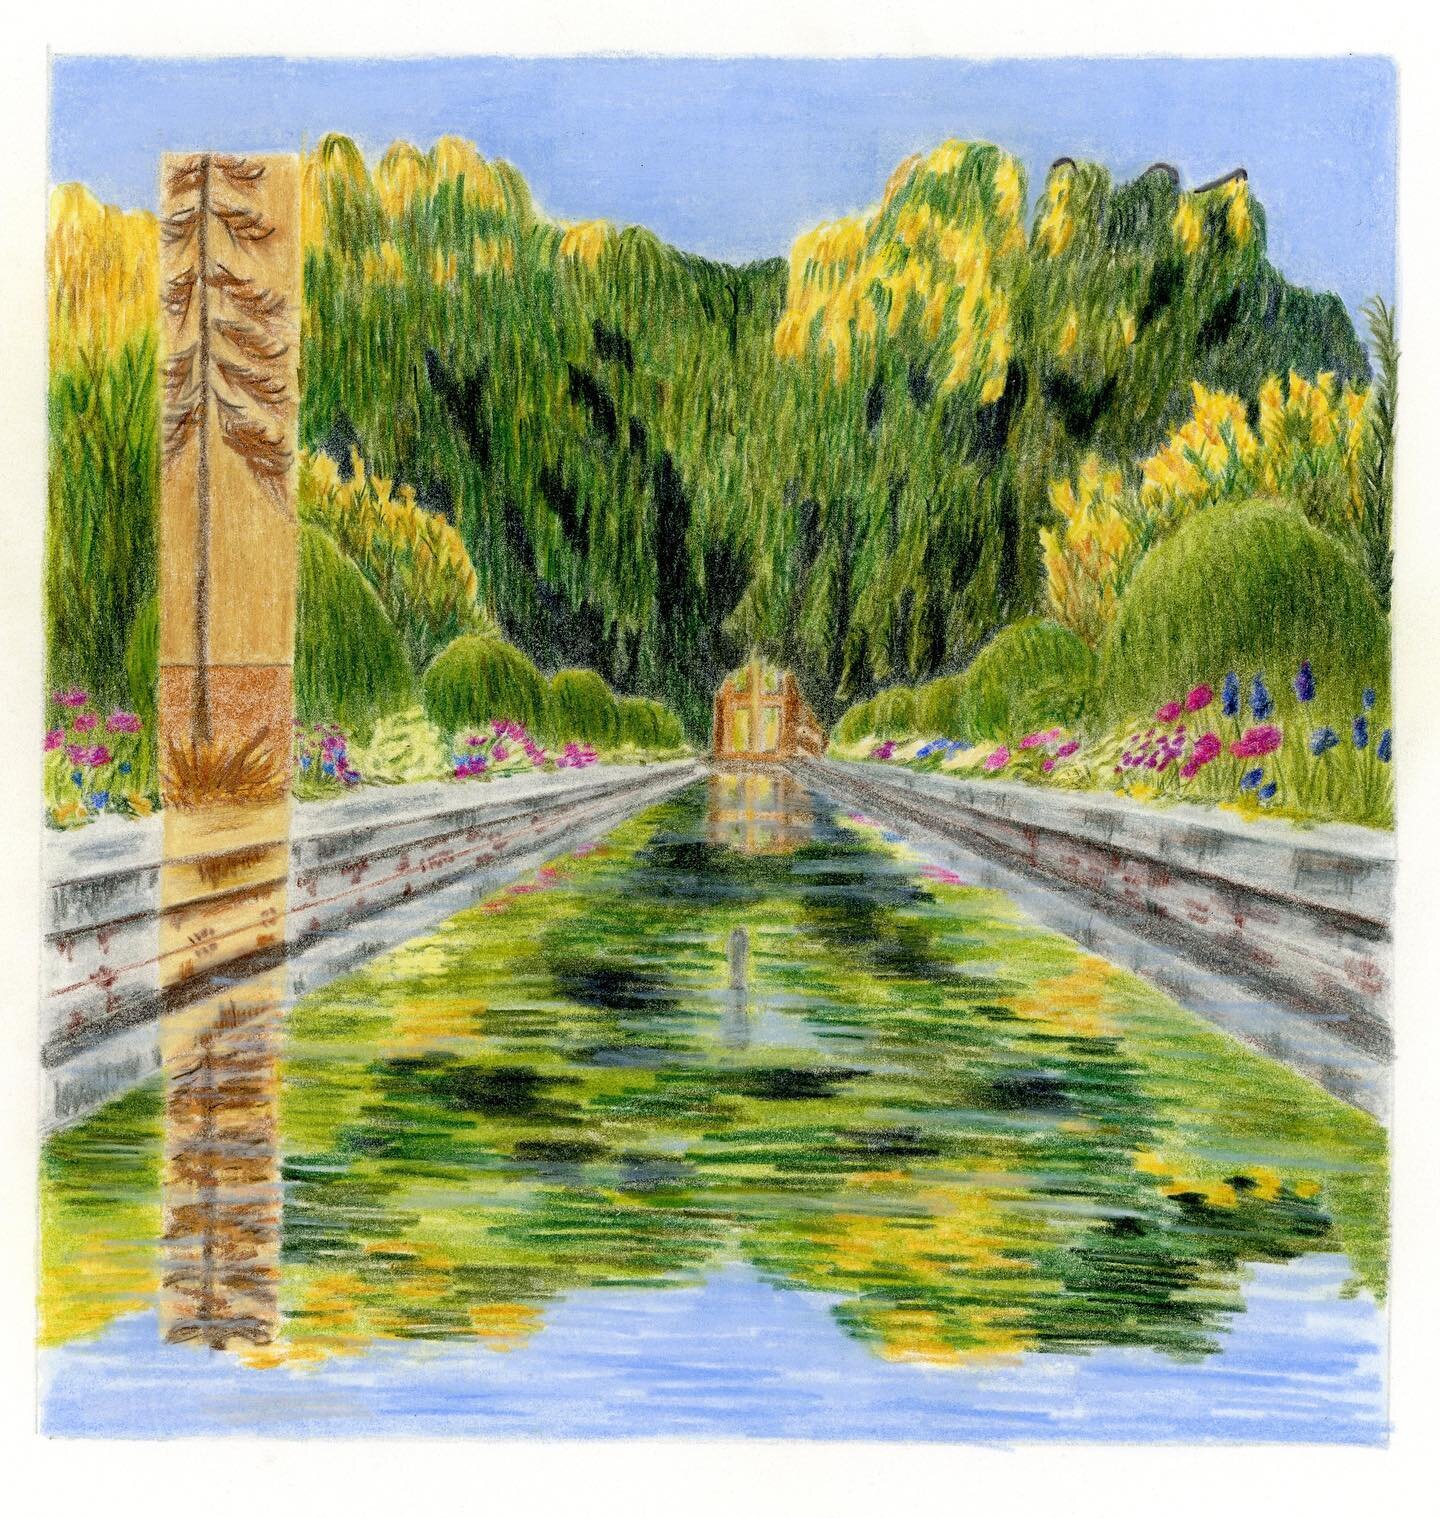 Check out the first finished work from my newest collection &ldquo;Abbott House Chronicles: An Artistic Voyage along Westchester&rsquo;s River Towns&rdquo;.
First stop: @untermyergardens 
**Untermyer Gardens: Restoration of Beauty Across Time**
Unter